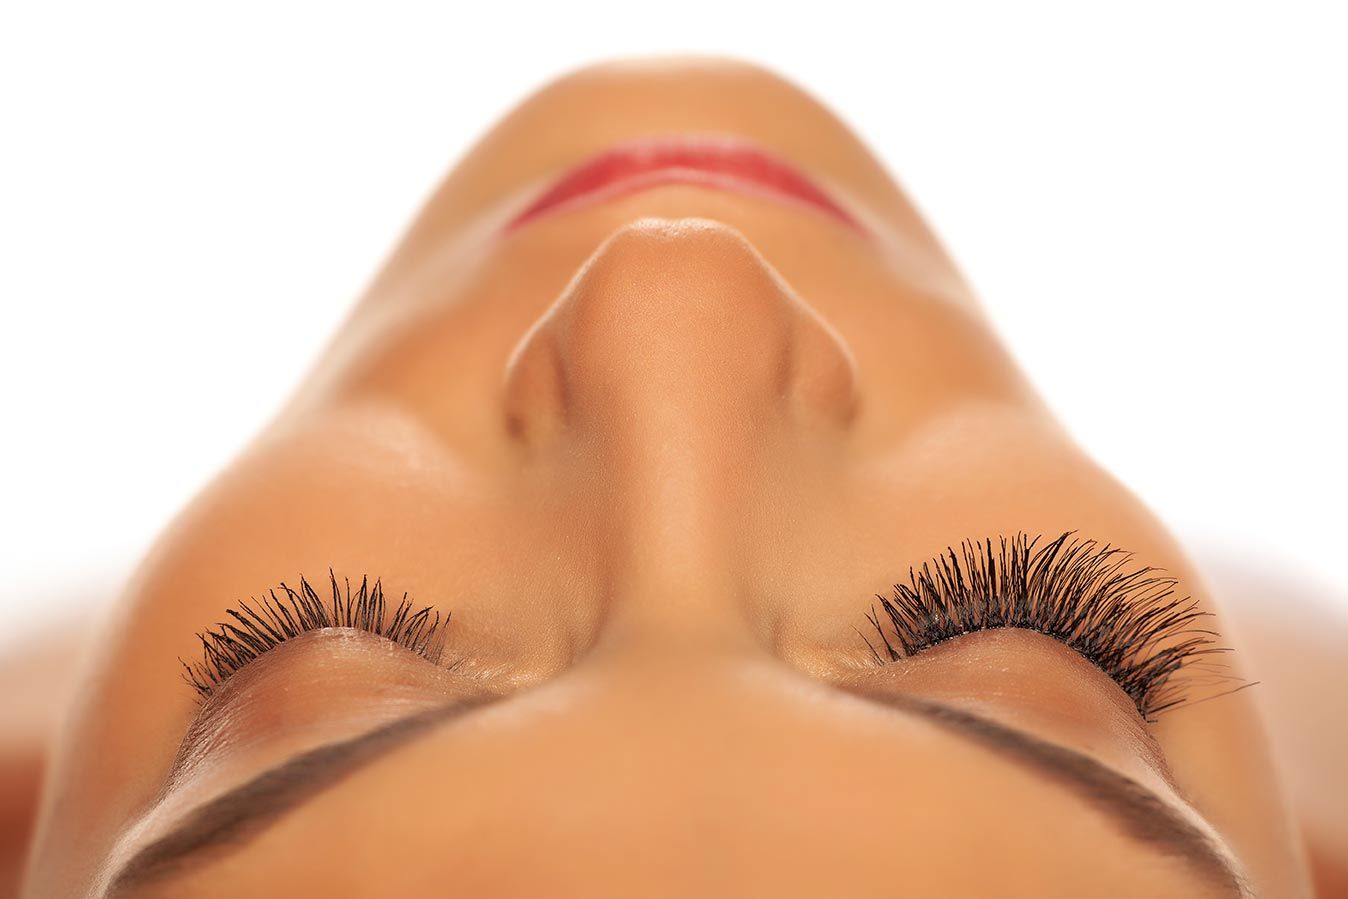 Aristocracy Salon & Day Spa offers Eyelash Extensions, Lifts & Tints in Plymouth, MA